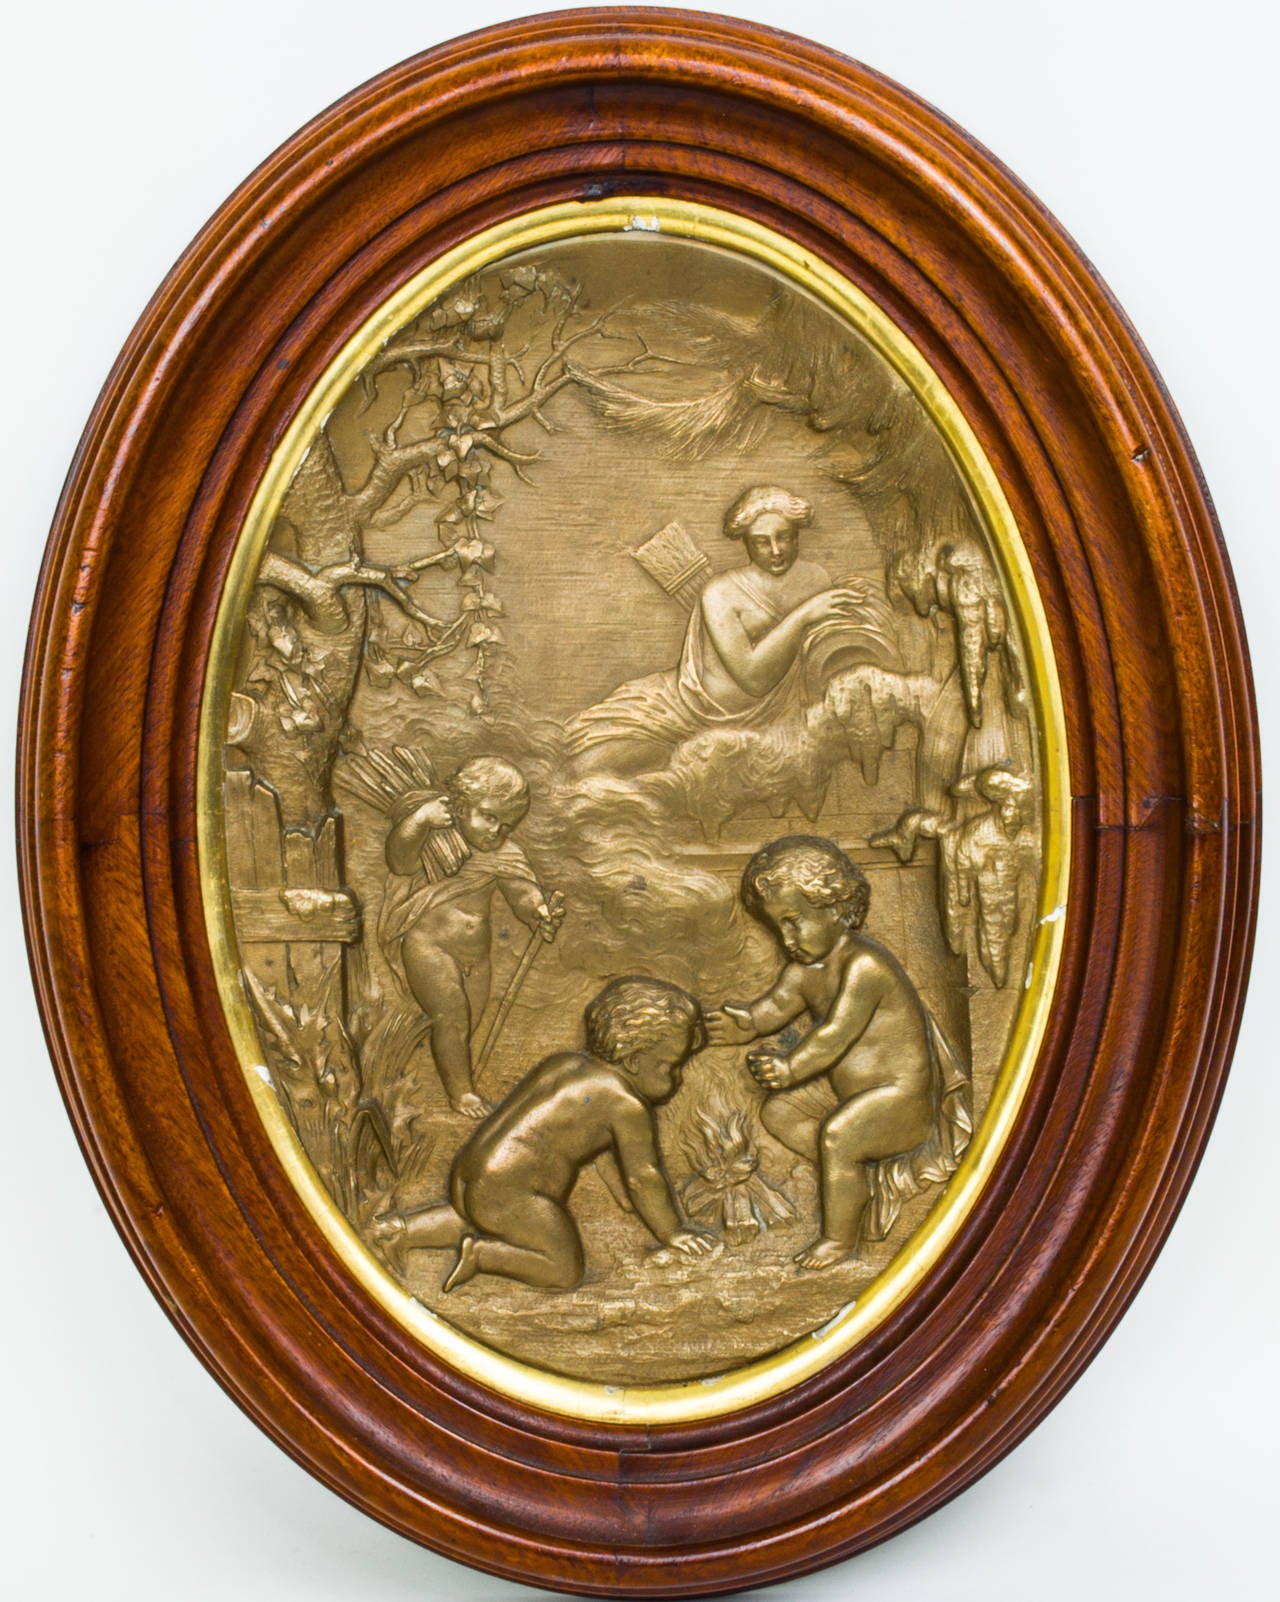 Pair of Oval Patinated Metal Wall Plaques in Wood Frame with Cherub Decorations
Stock Number: PA7